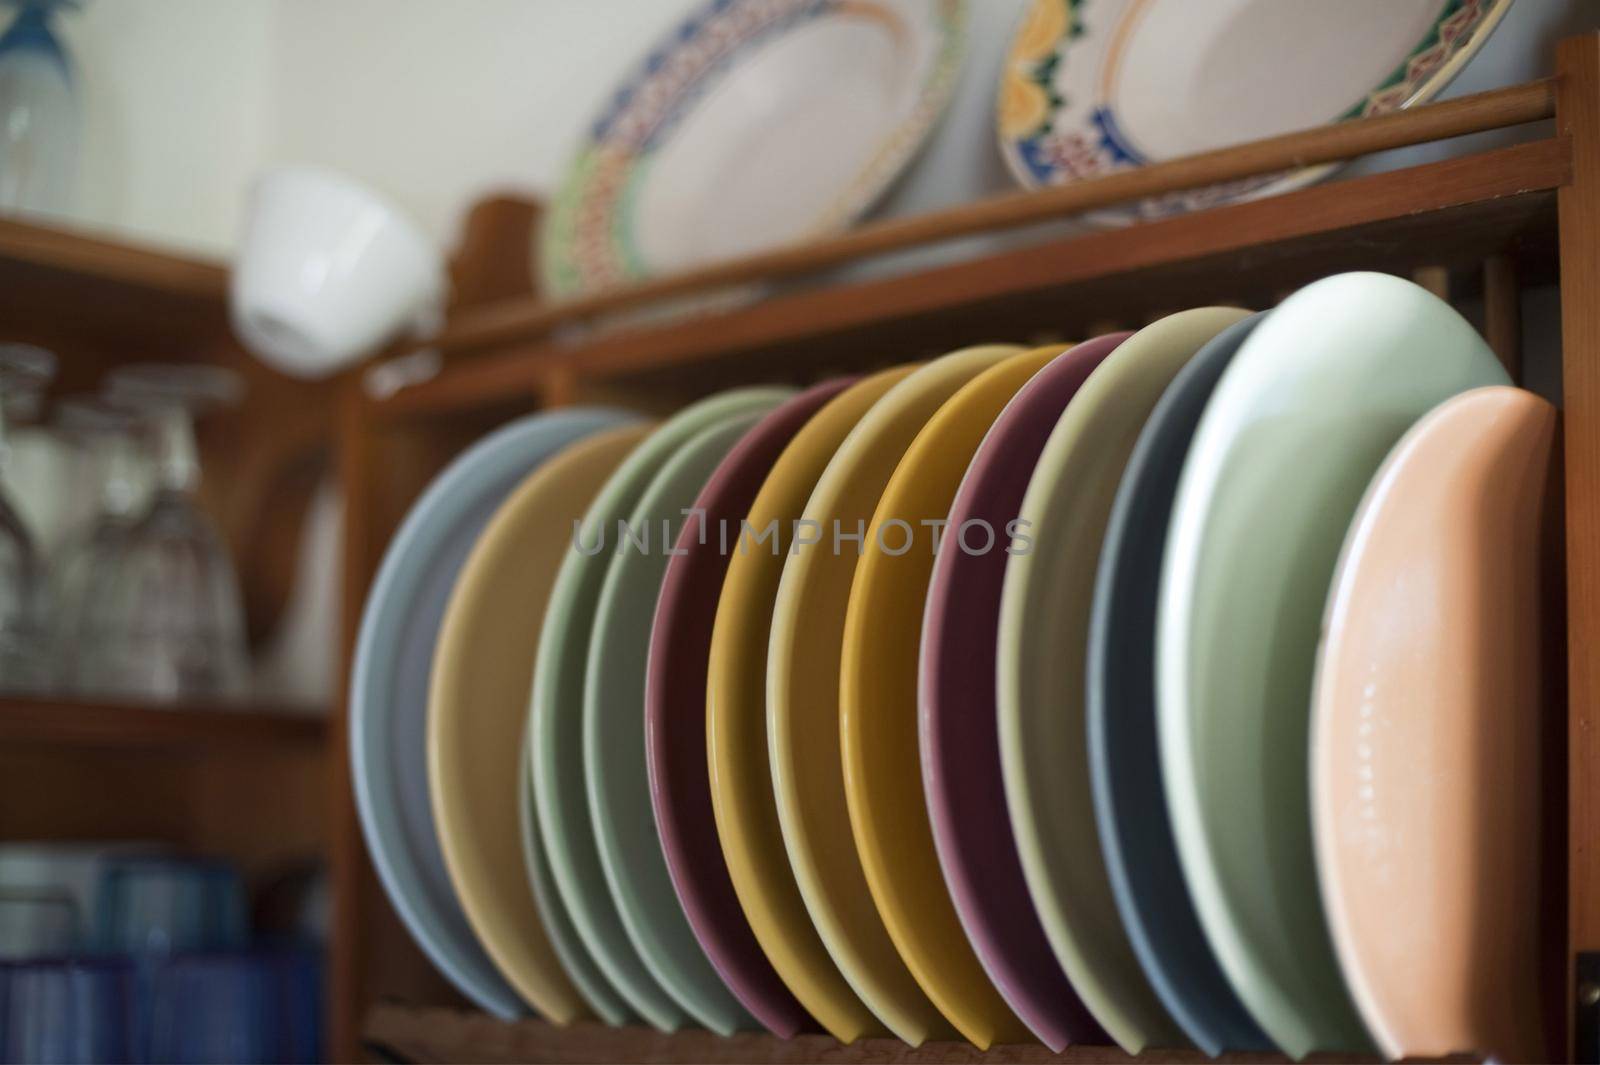 Assorted colorful plates in a wooden wall mounted rack in a kitchen viewed close up in a food and catering concept